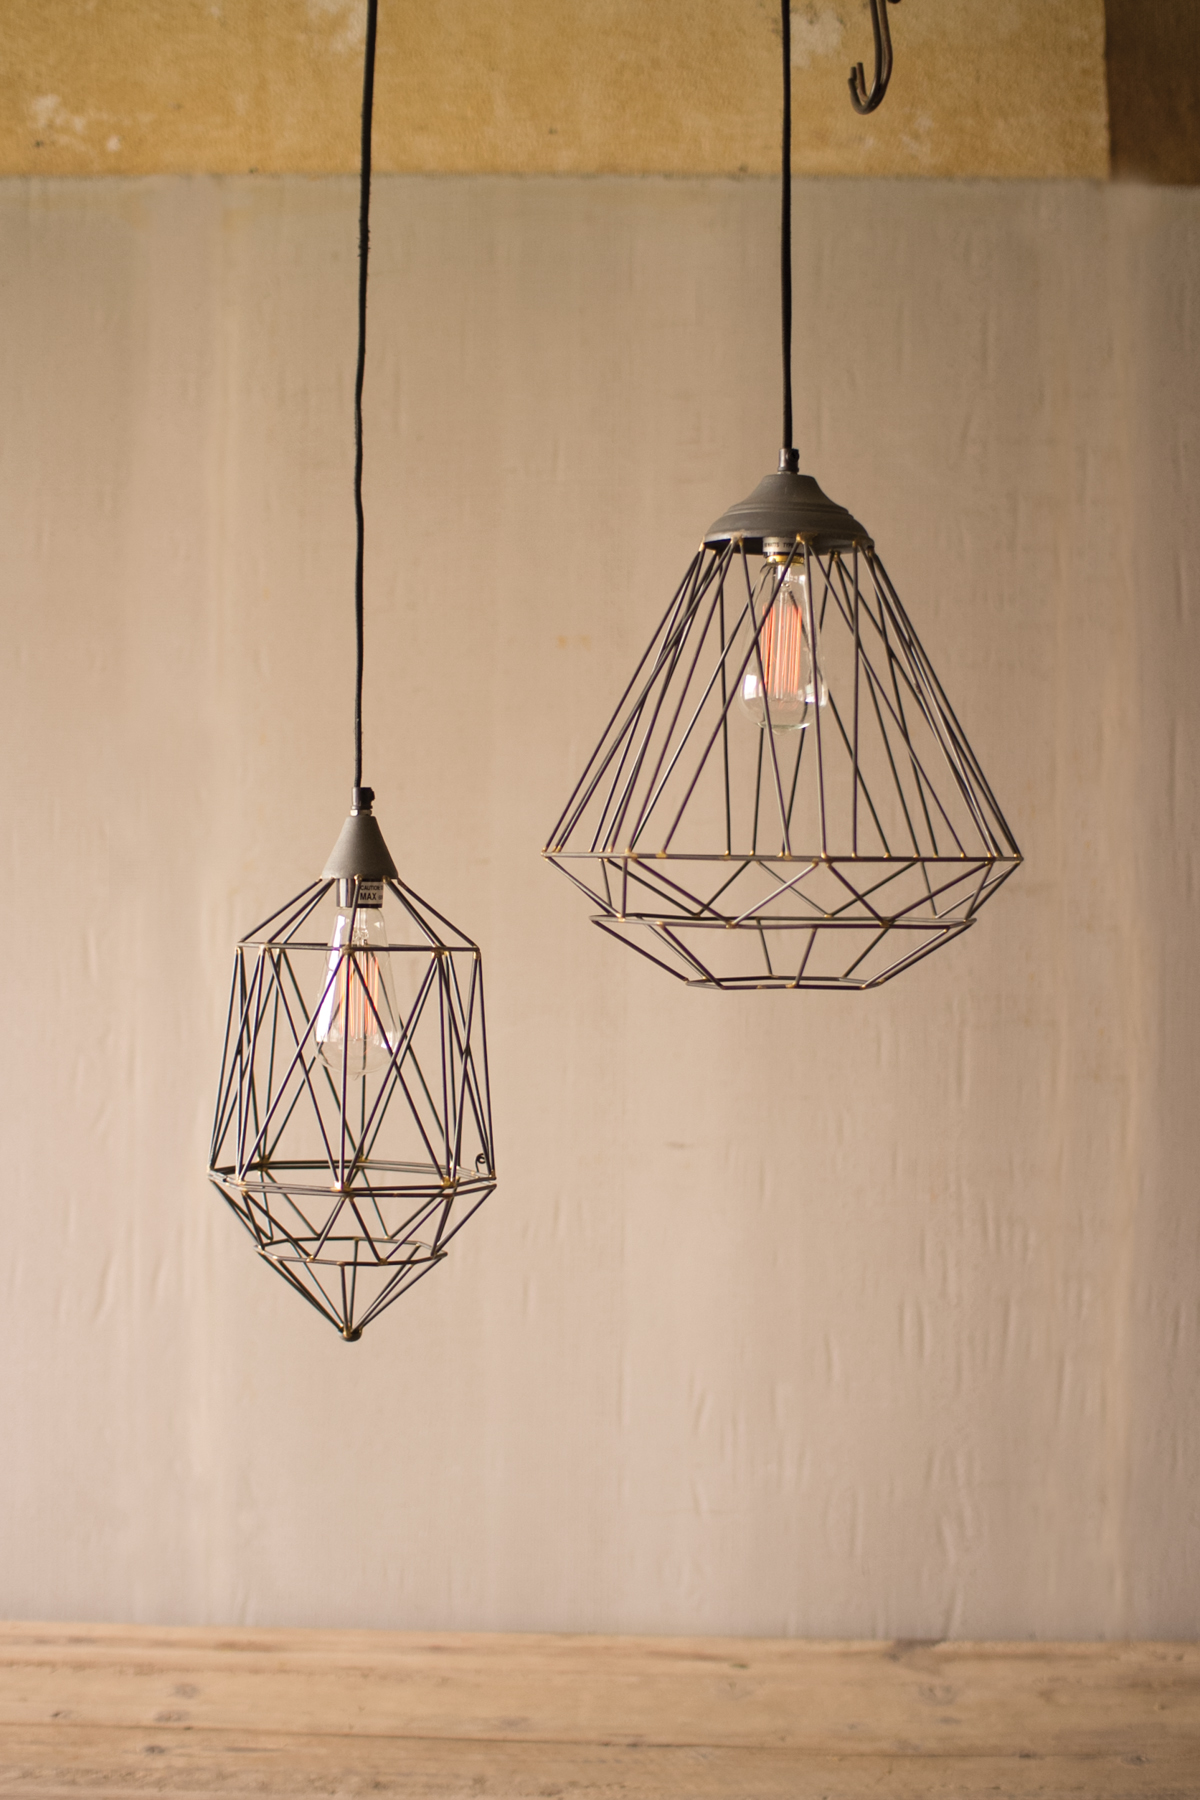 Lamps jewelry and geometry